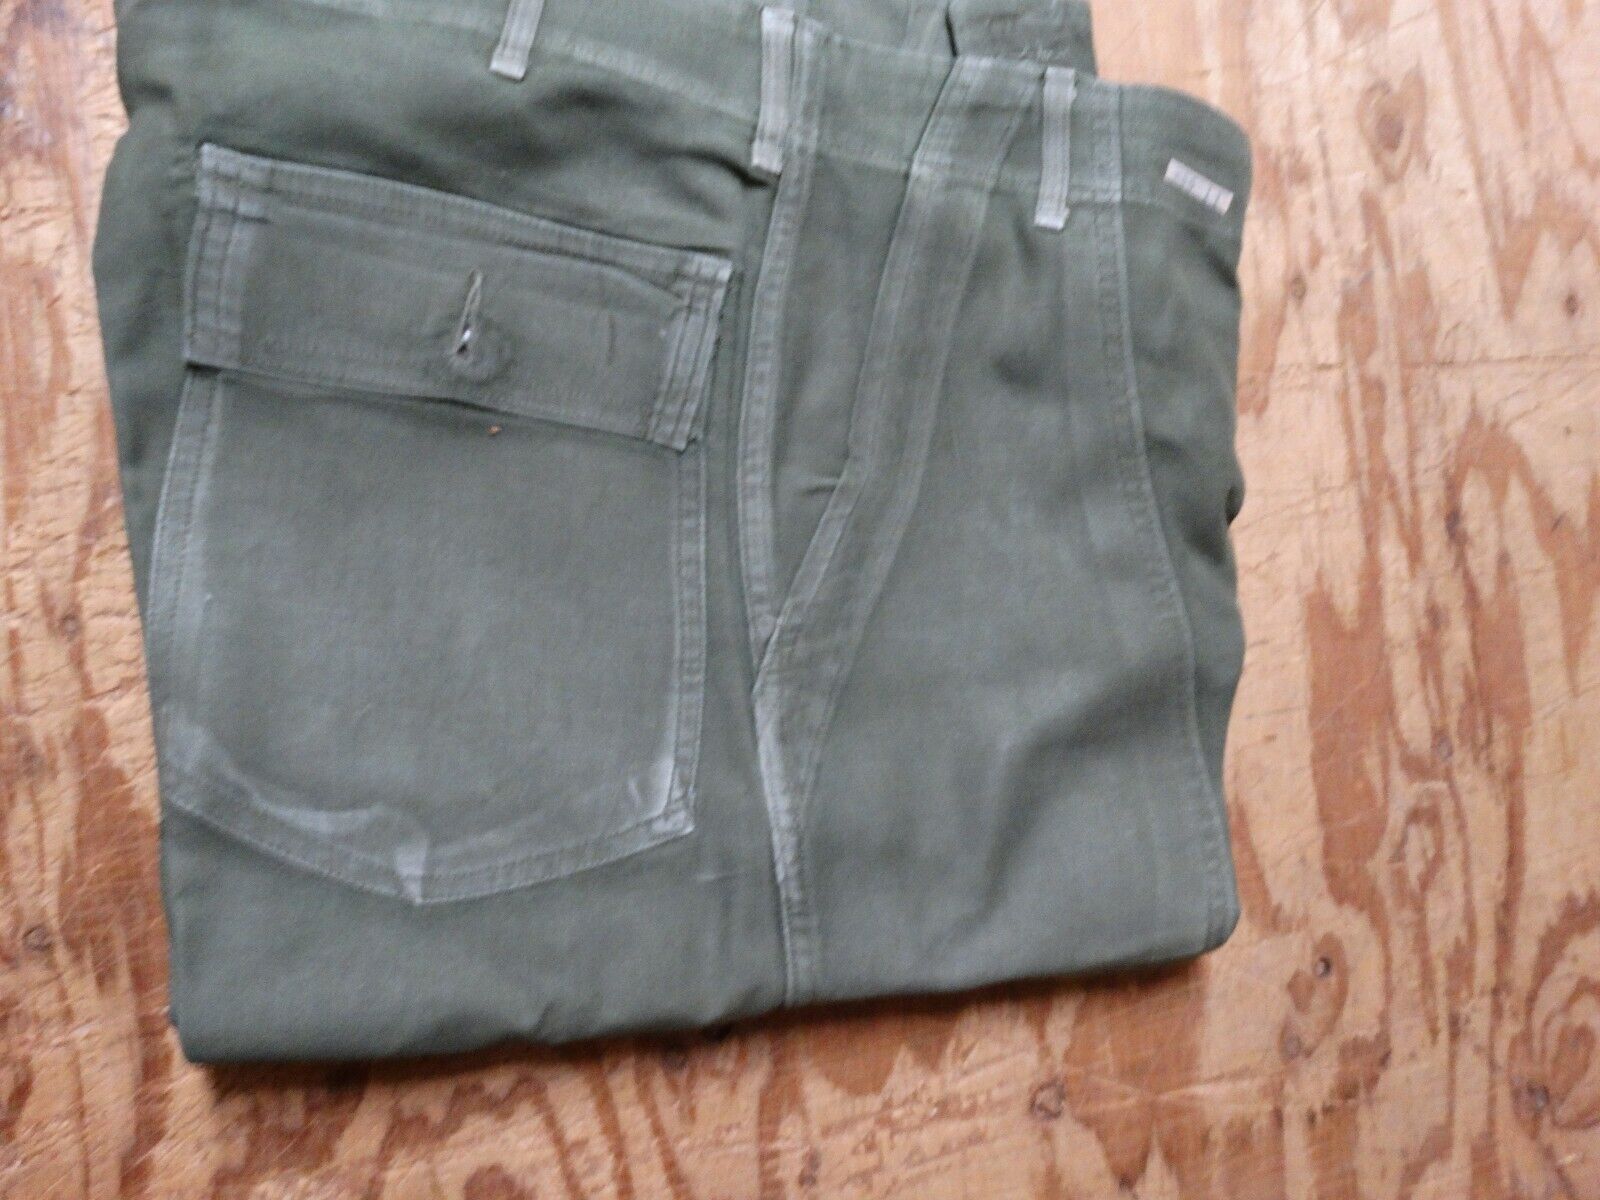 Vintage U.S. Military Trousers with Button Down Fly Size 31 x 30